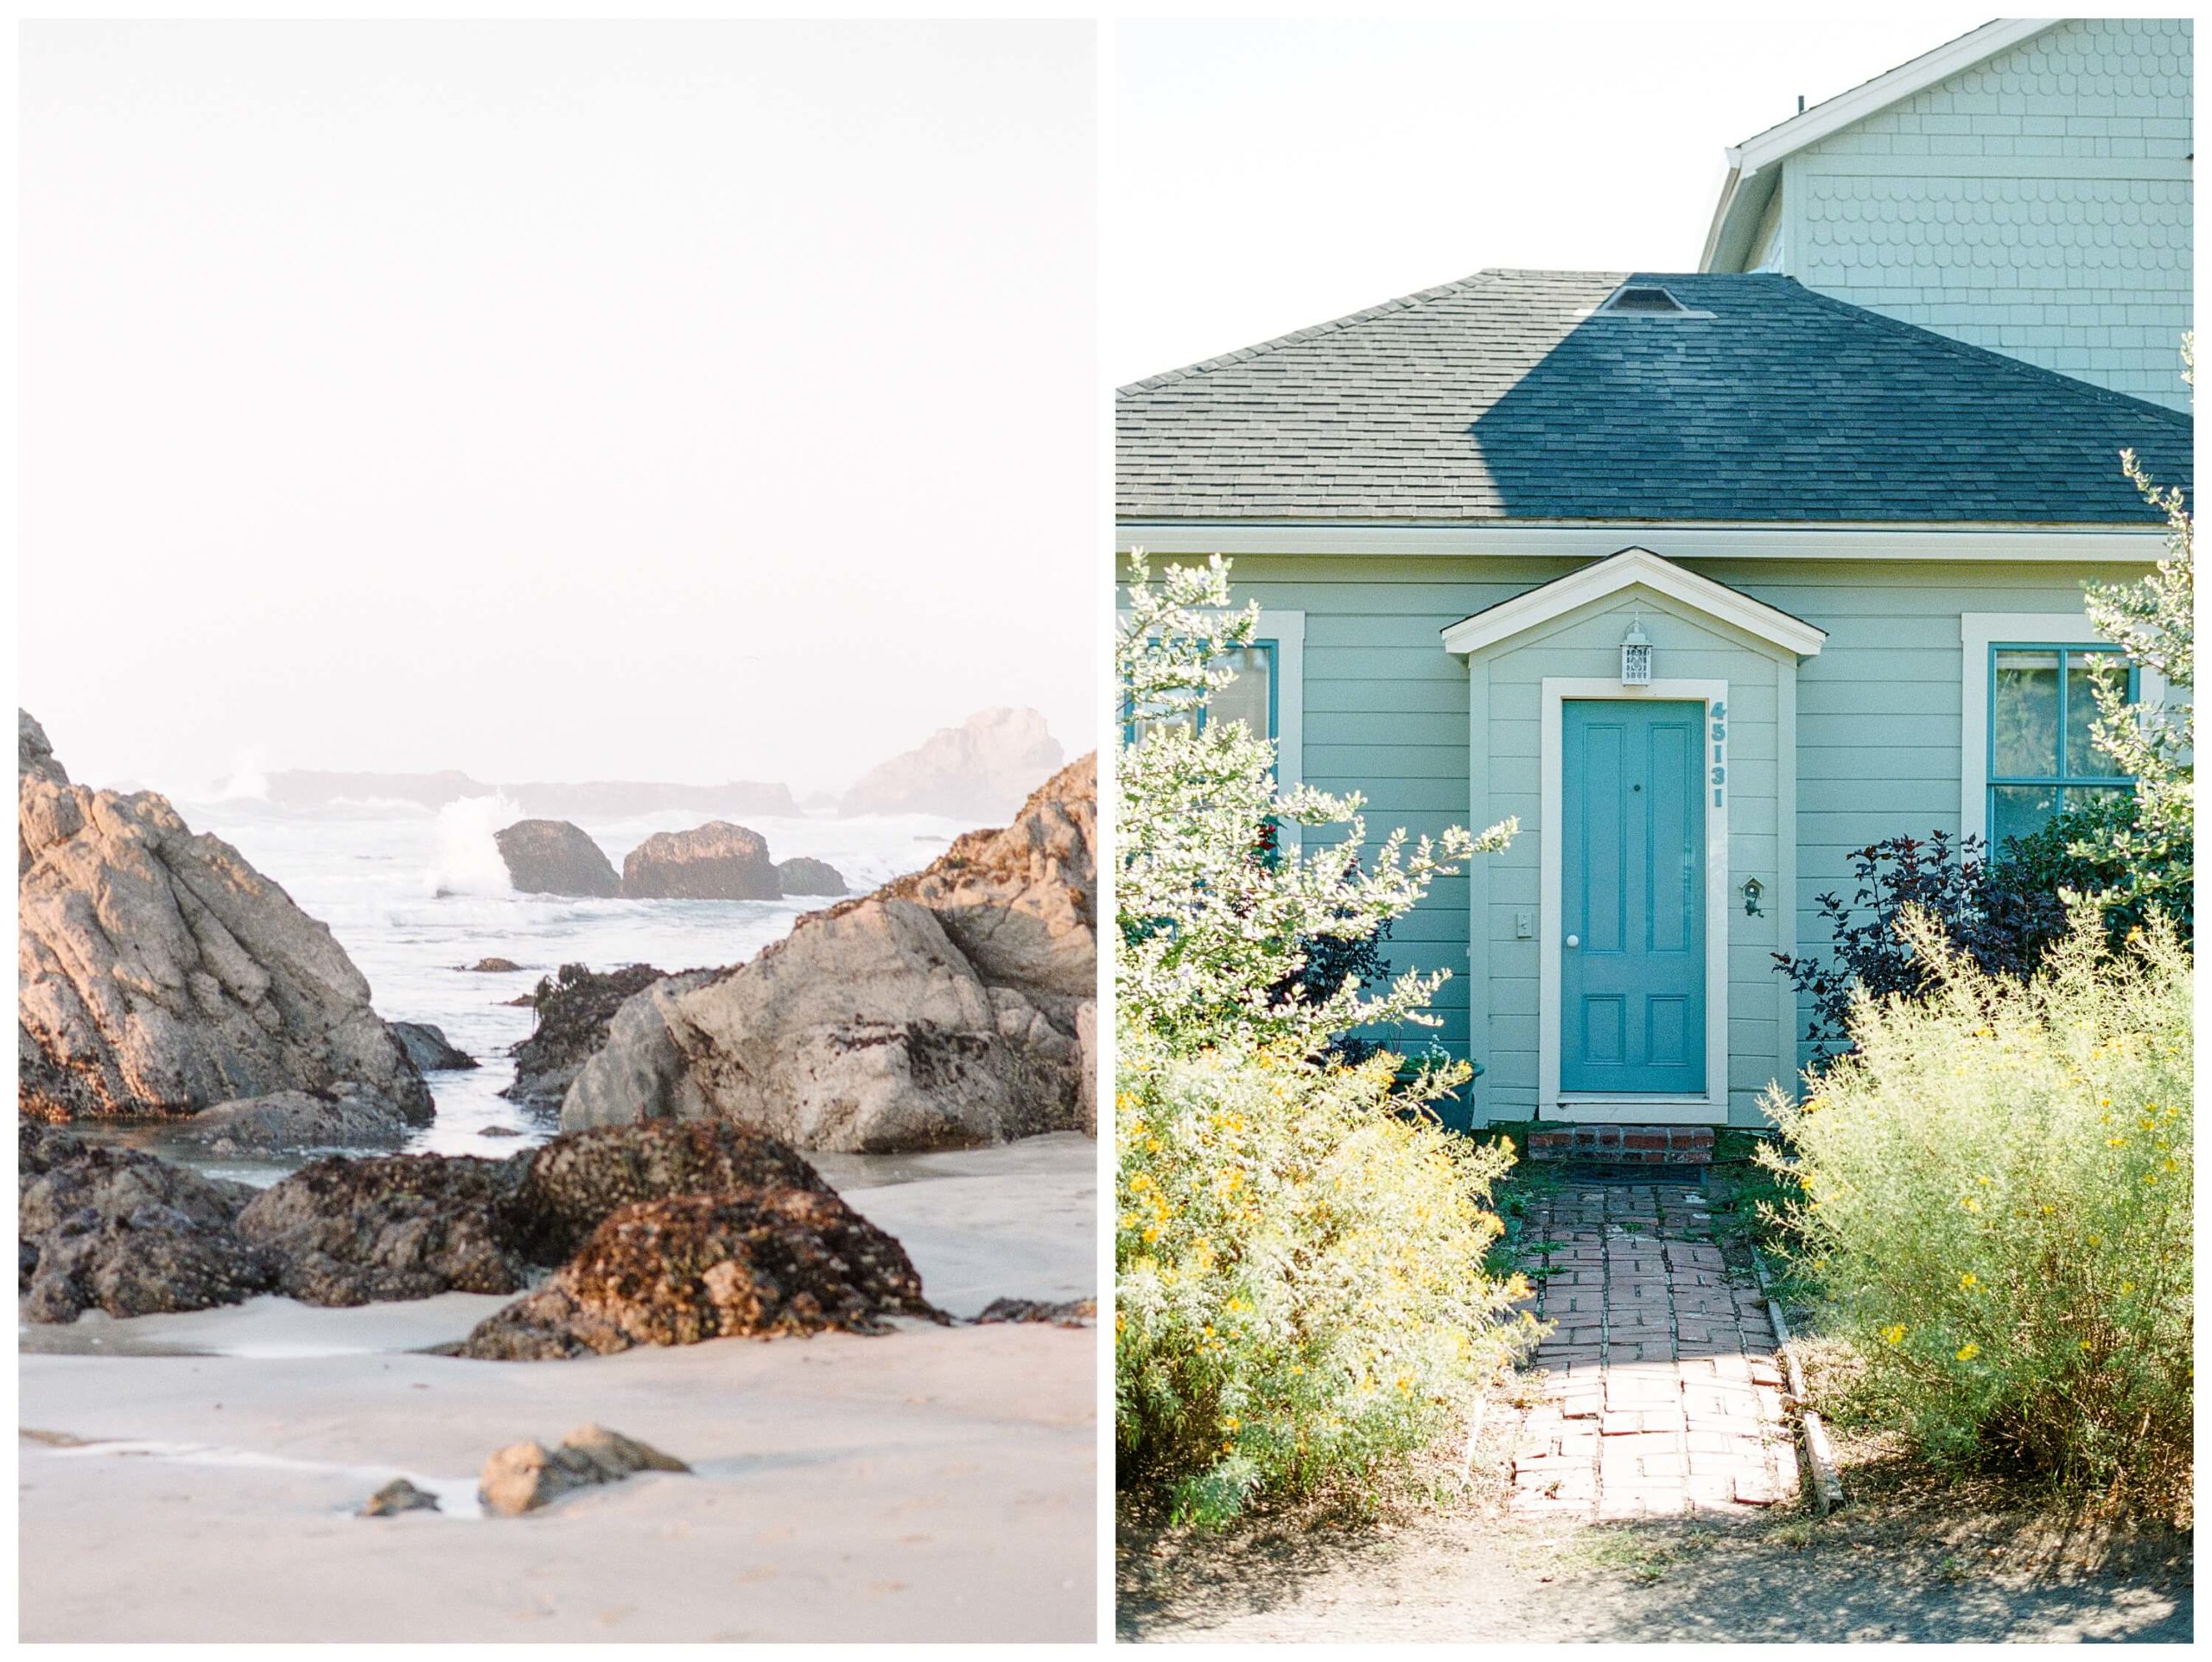 Left: A gentle sunset on Glass Beach in Fort Bragg, a northern California coastal town. Waves crash violently on the rocks. Right: A cheerful blue door spotted in the town of Mendocino, a northern California coastal town with New England saltbox aesthetic.